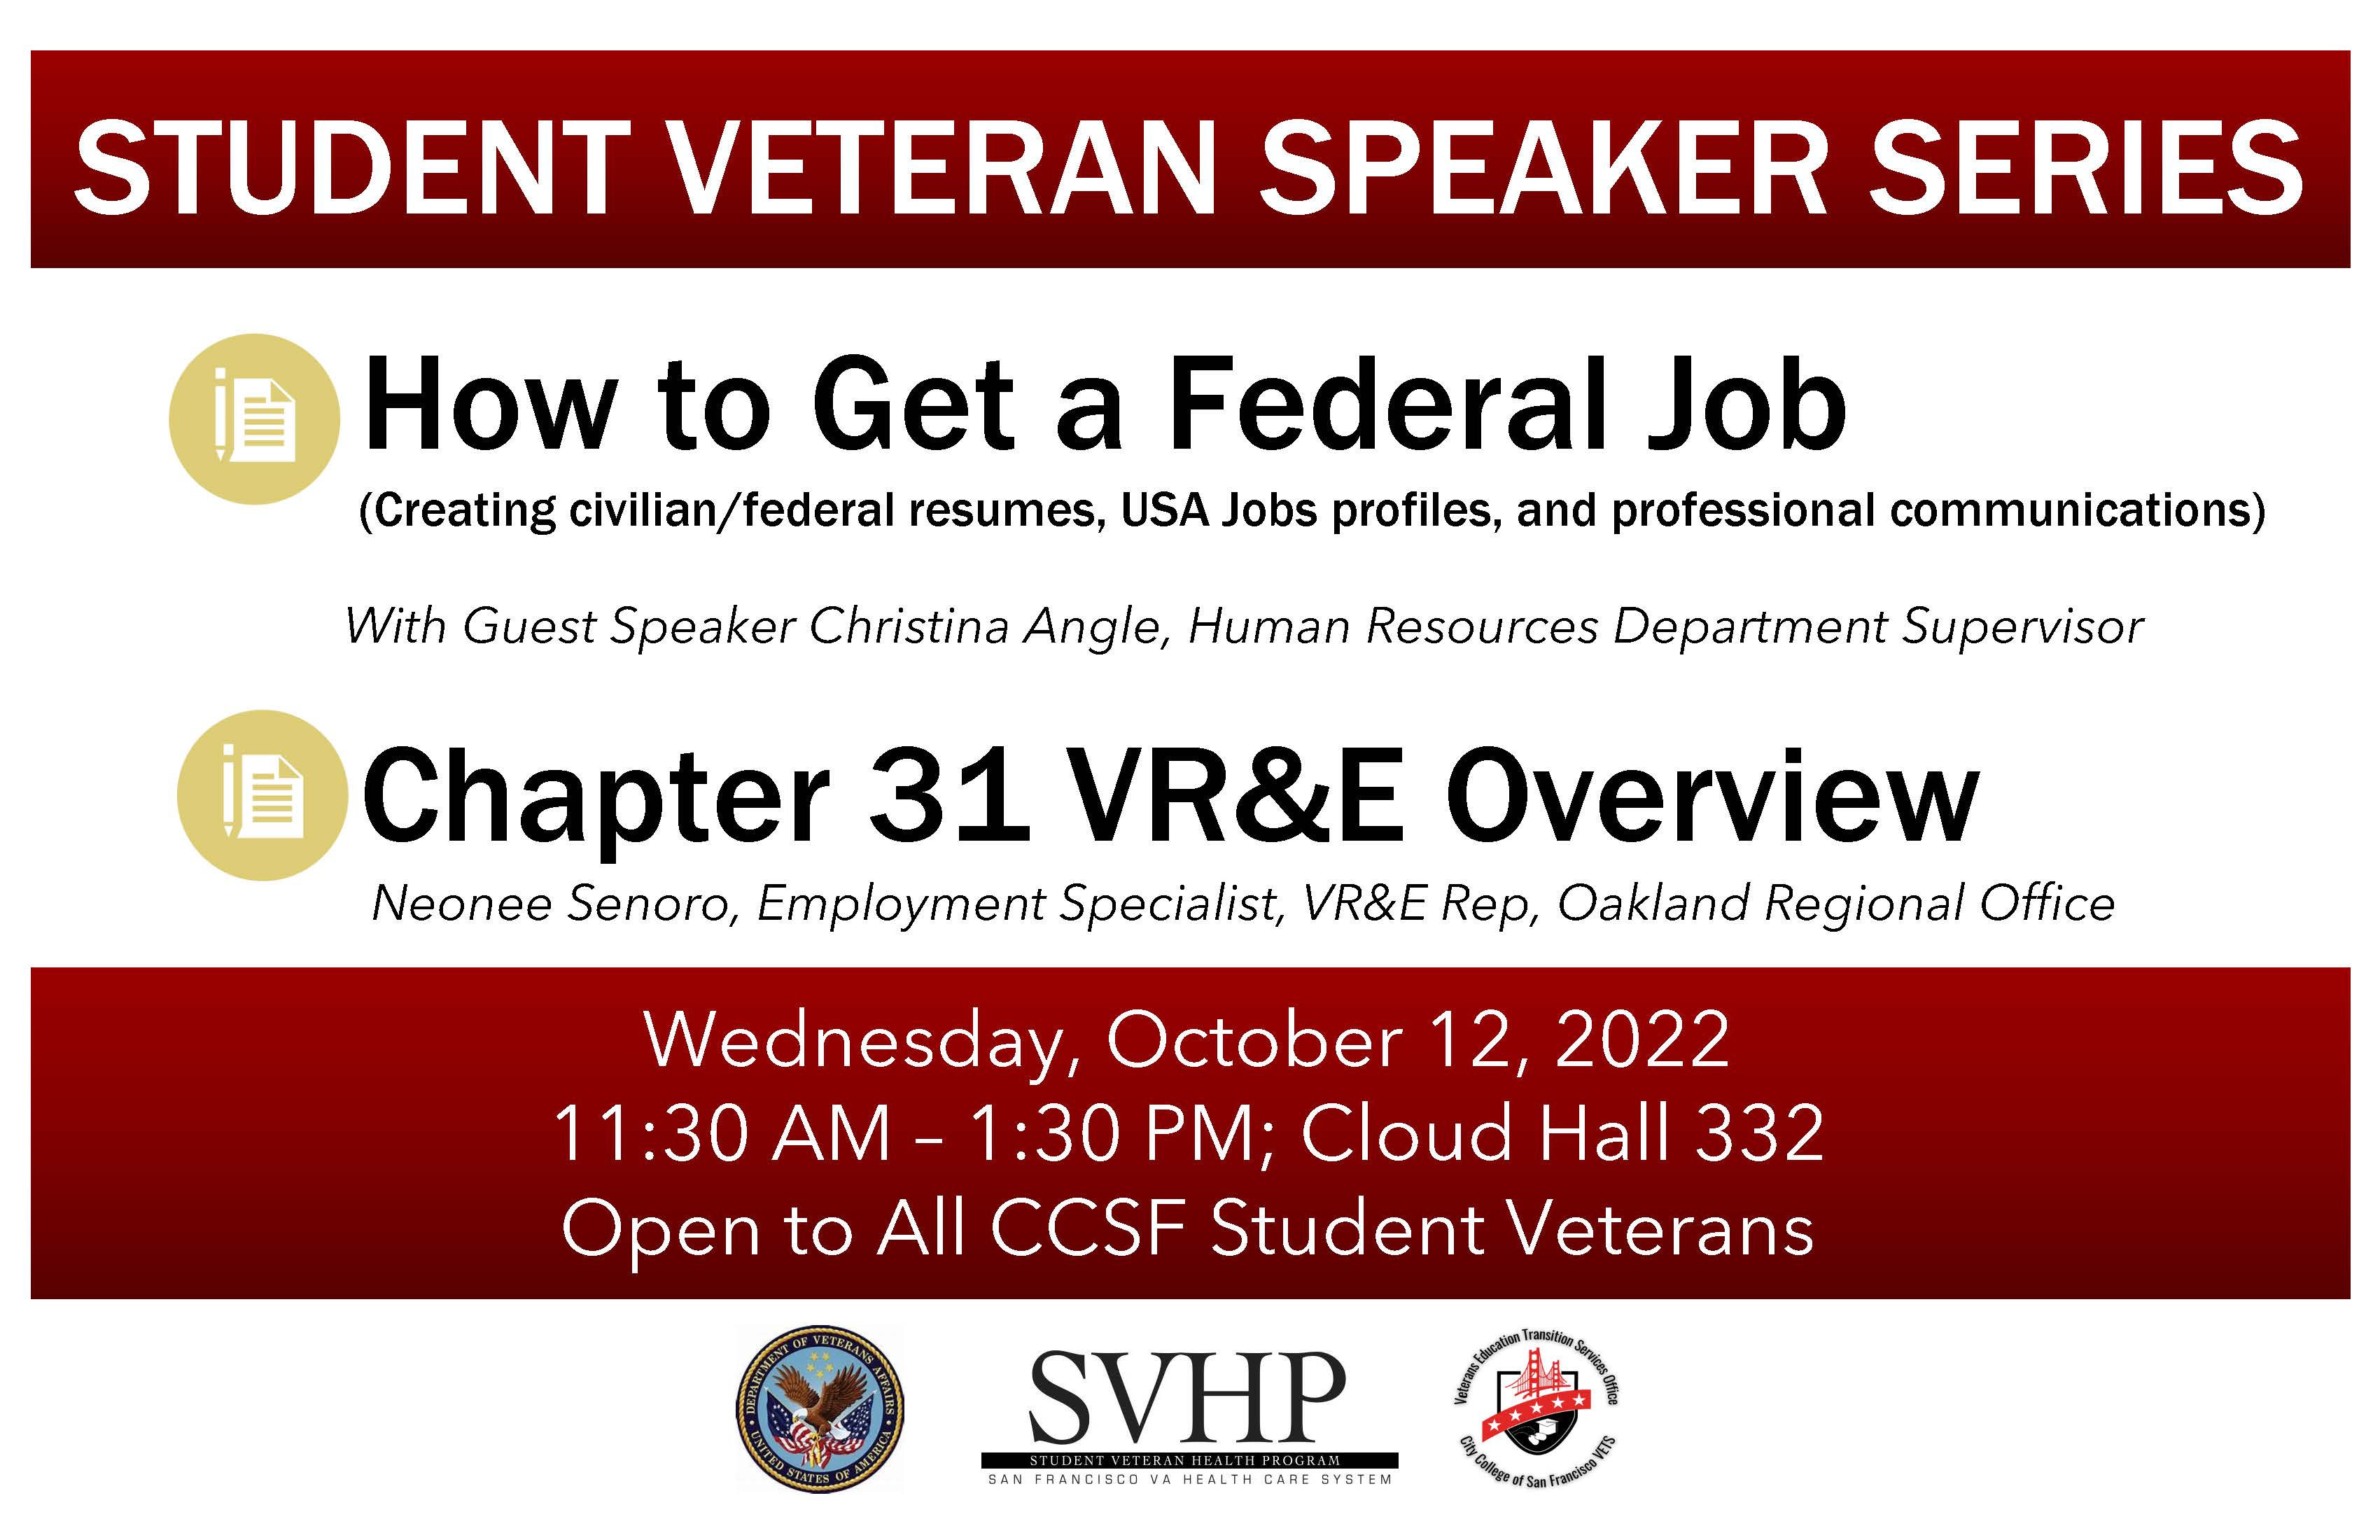 Student Veteran Speaker Series - How to get a federal job. Chapter 31 VR&E overview. Wednesday, October 12, 2022, 11:30 AM - 1:30 PM; Cloud Hall 332